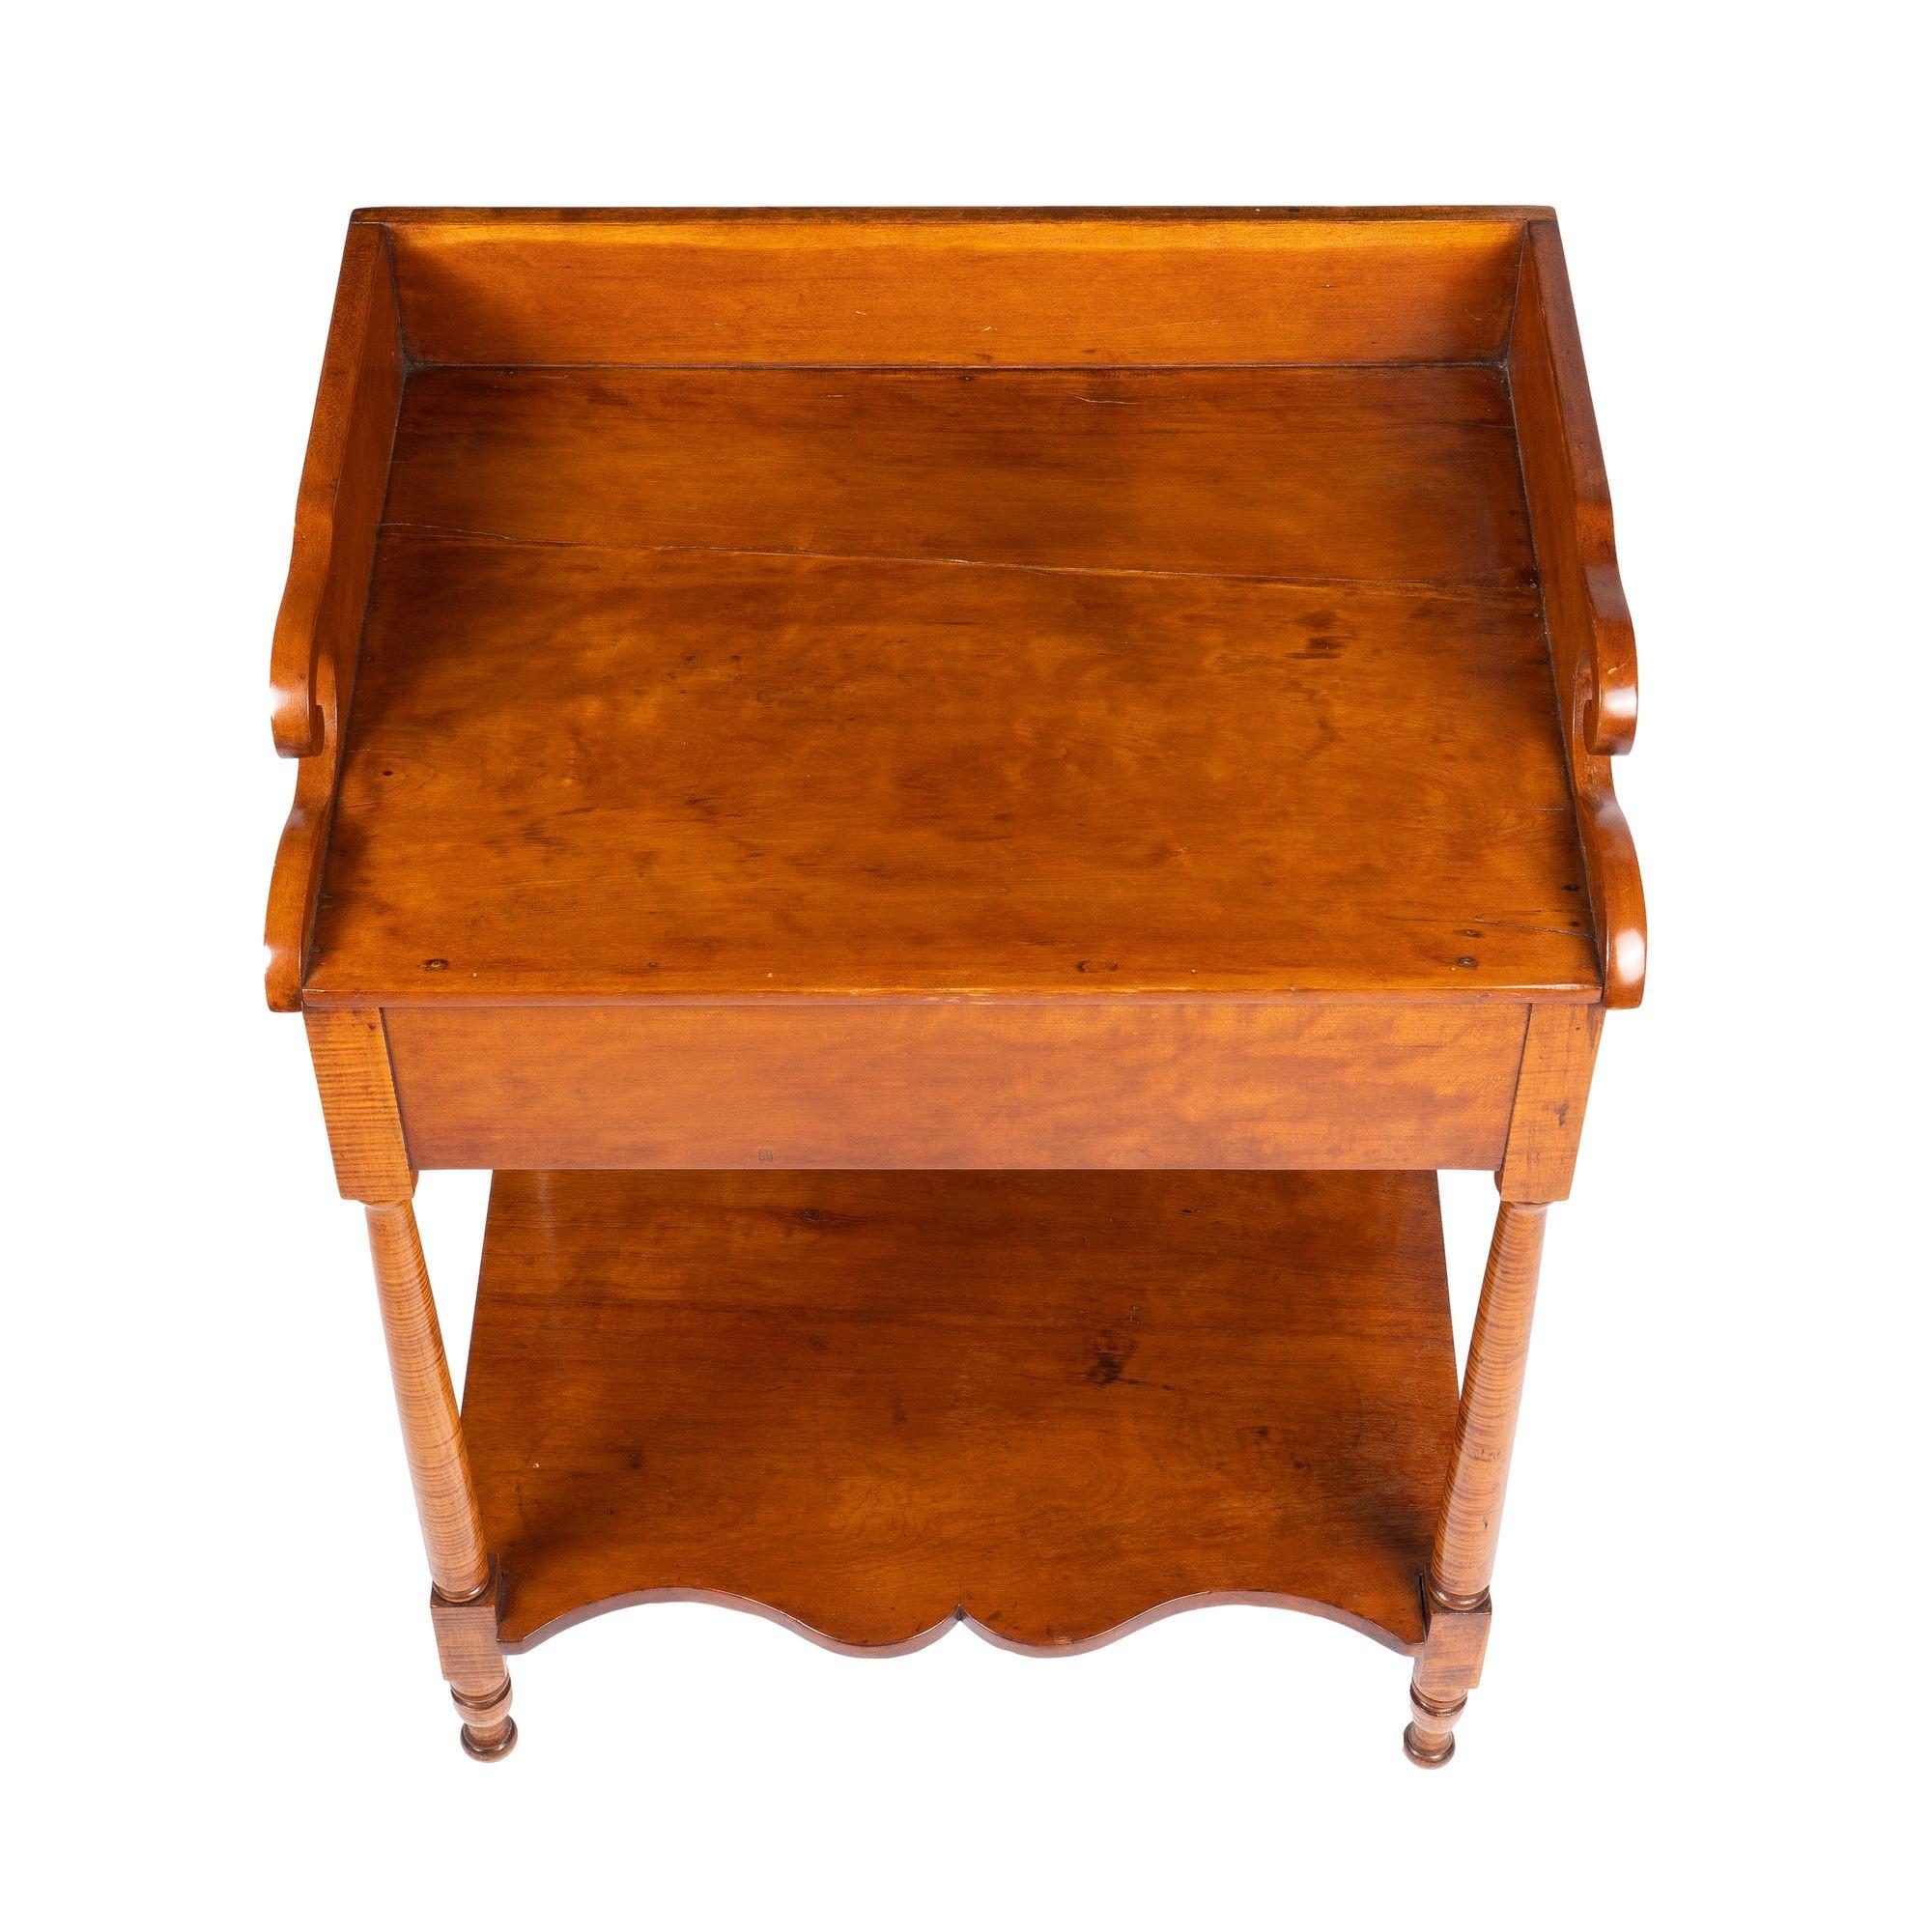 Philadelphia Cherry Wood Stand with Splash on a Conforming Apron, 1820 For Sale 4